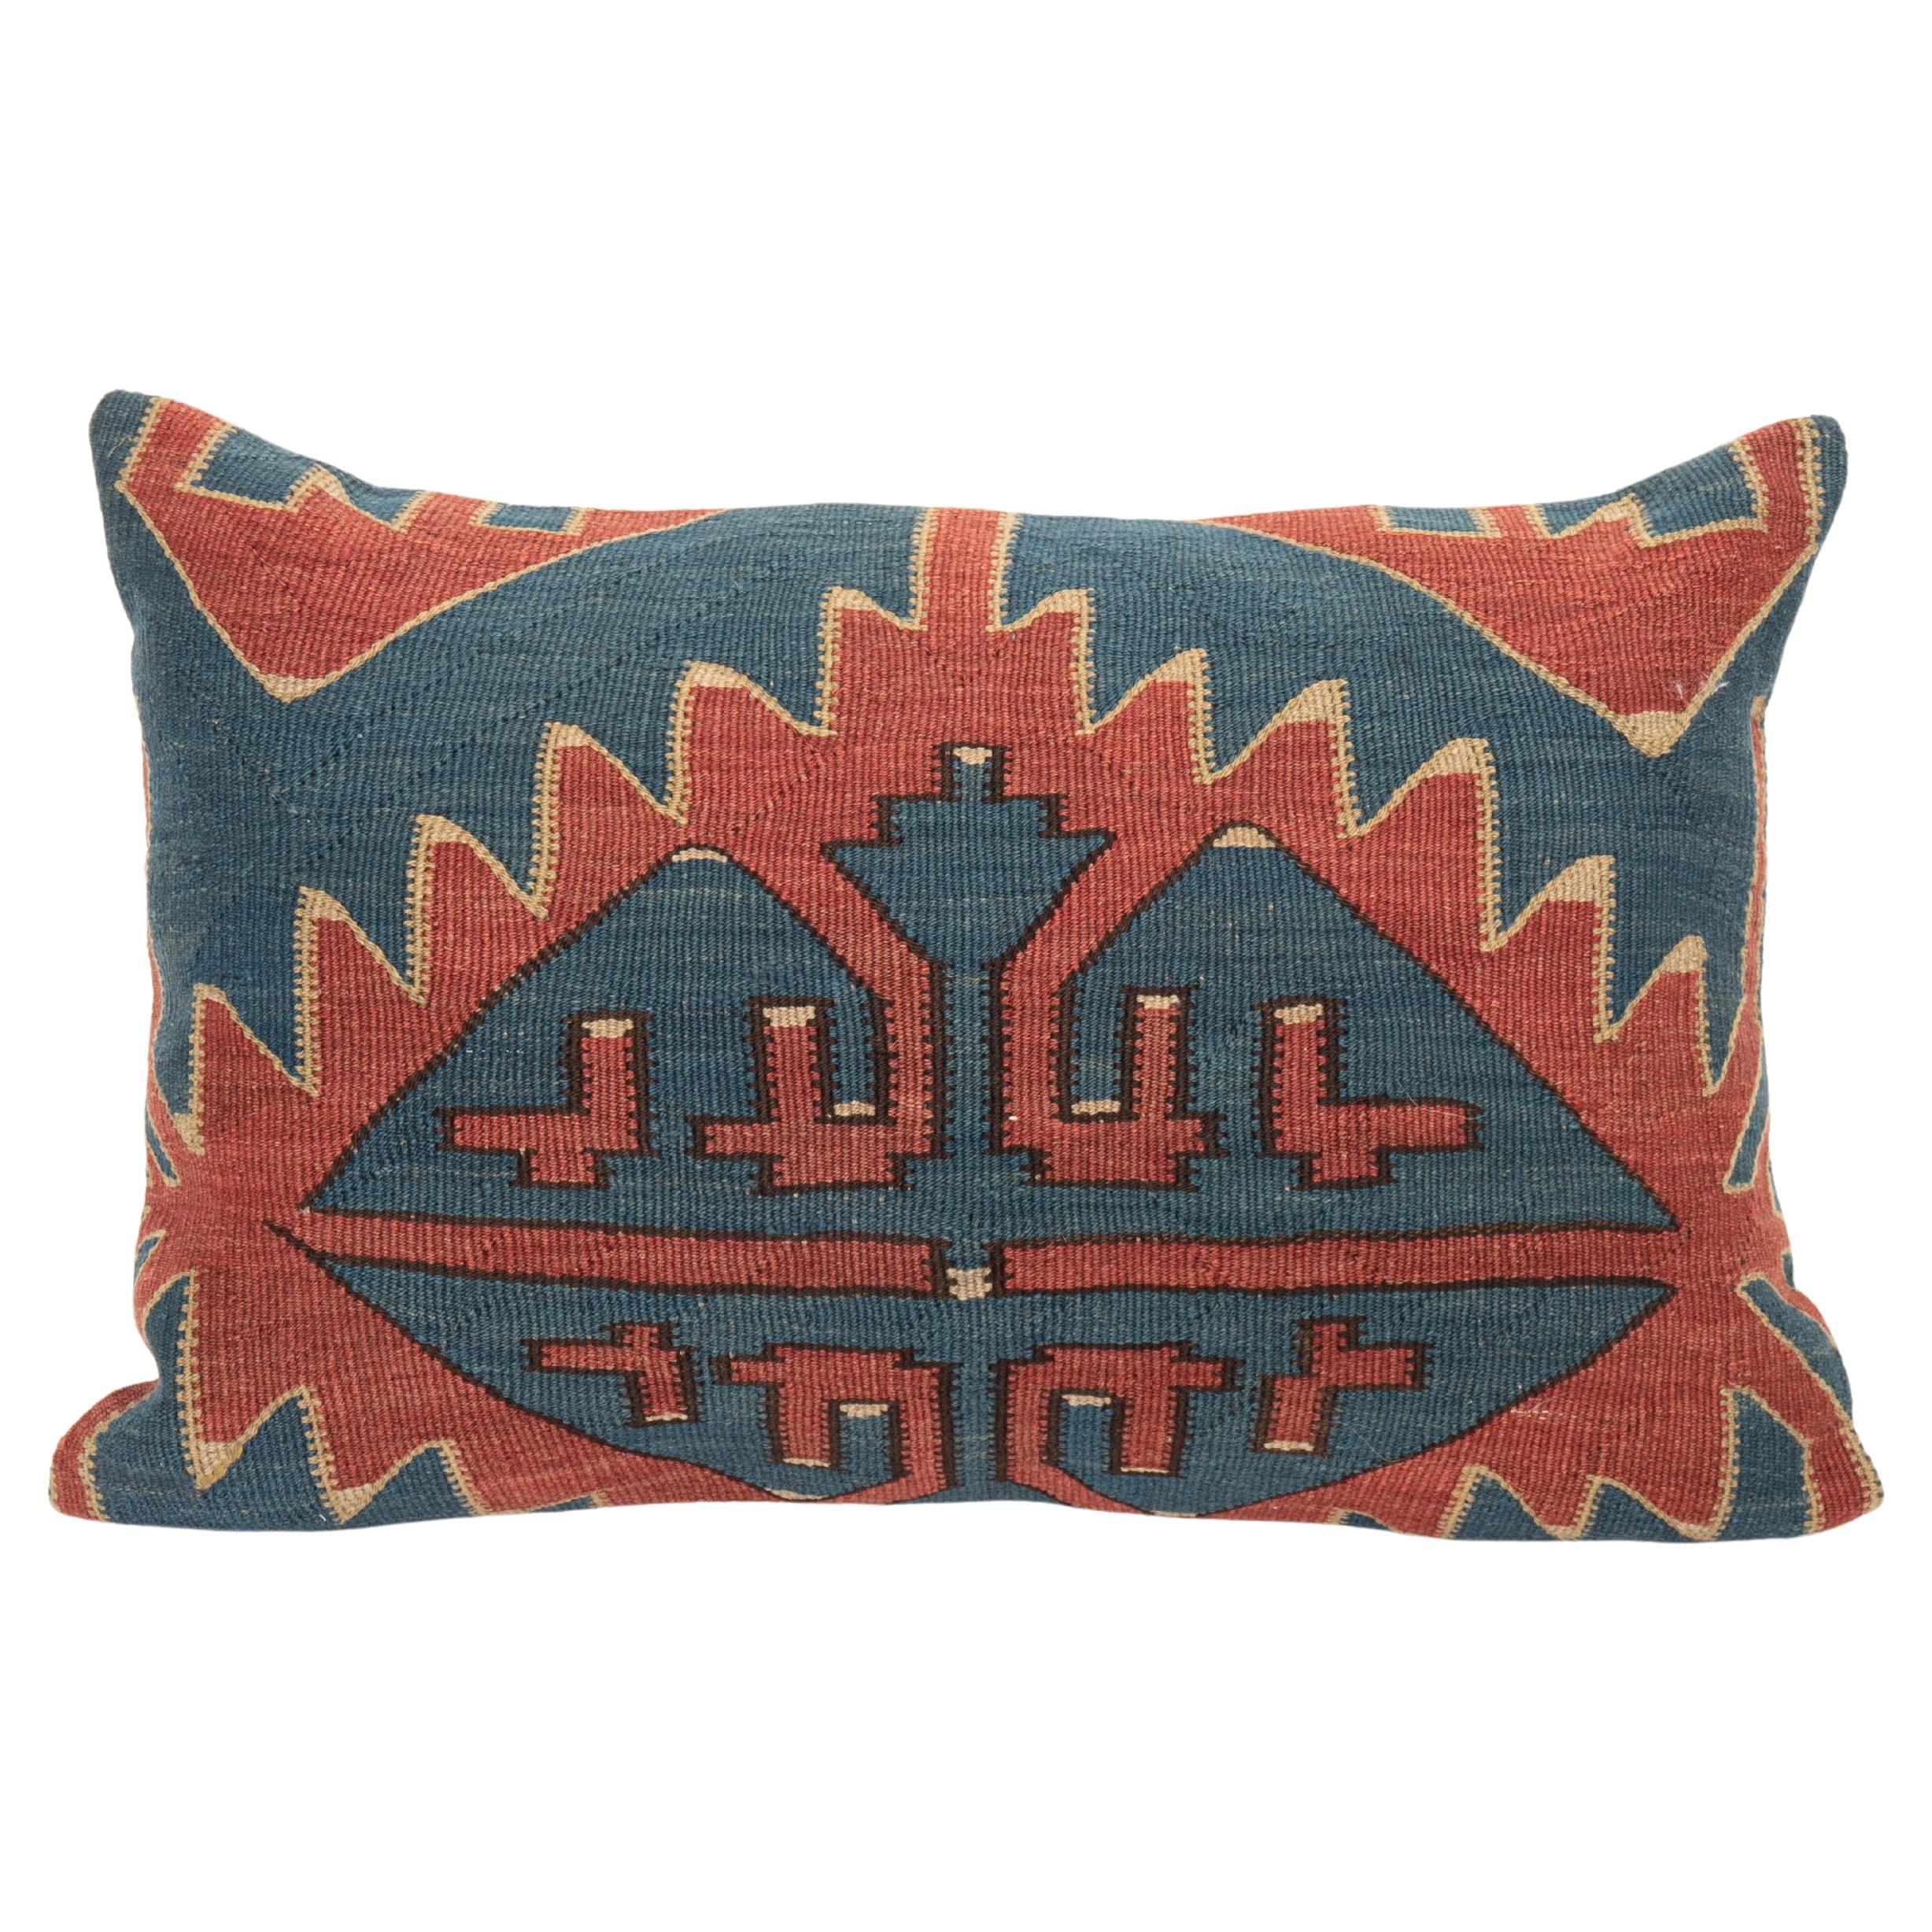 Floor Cushion Made from an Antique Avar Kilim from Dagestan , Early 20th C.